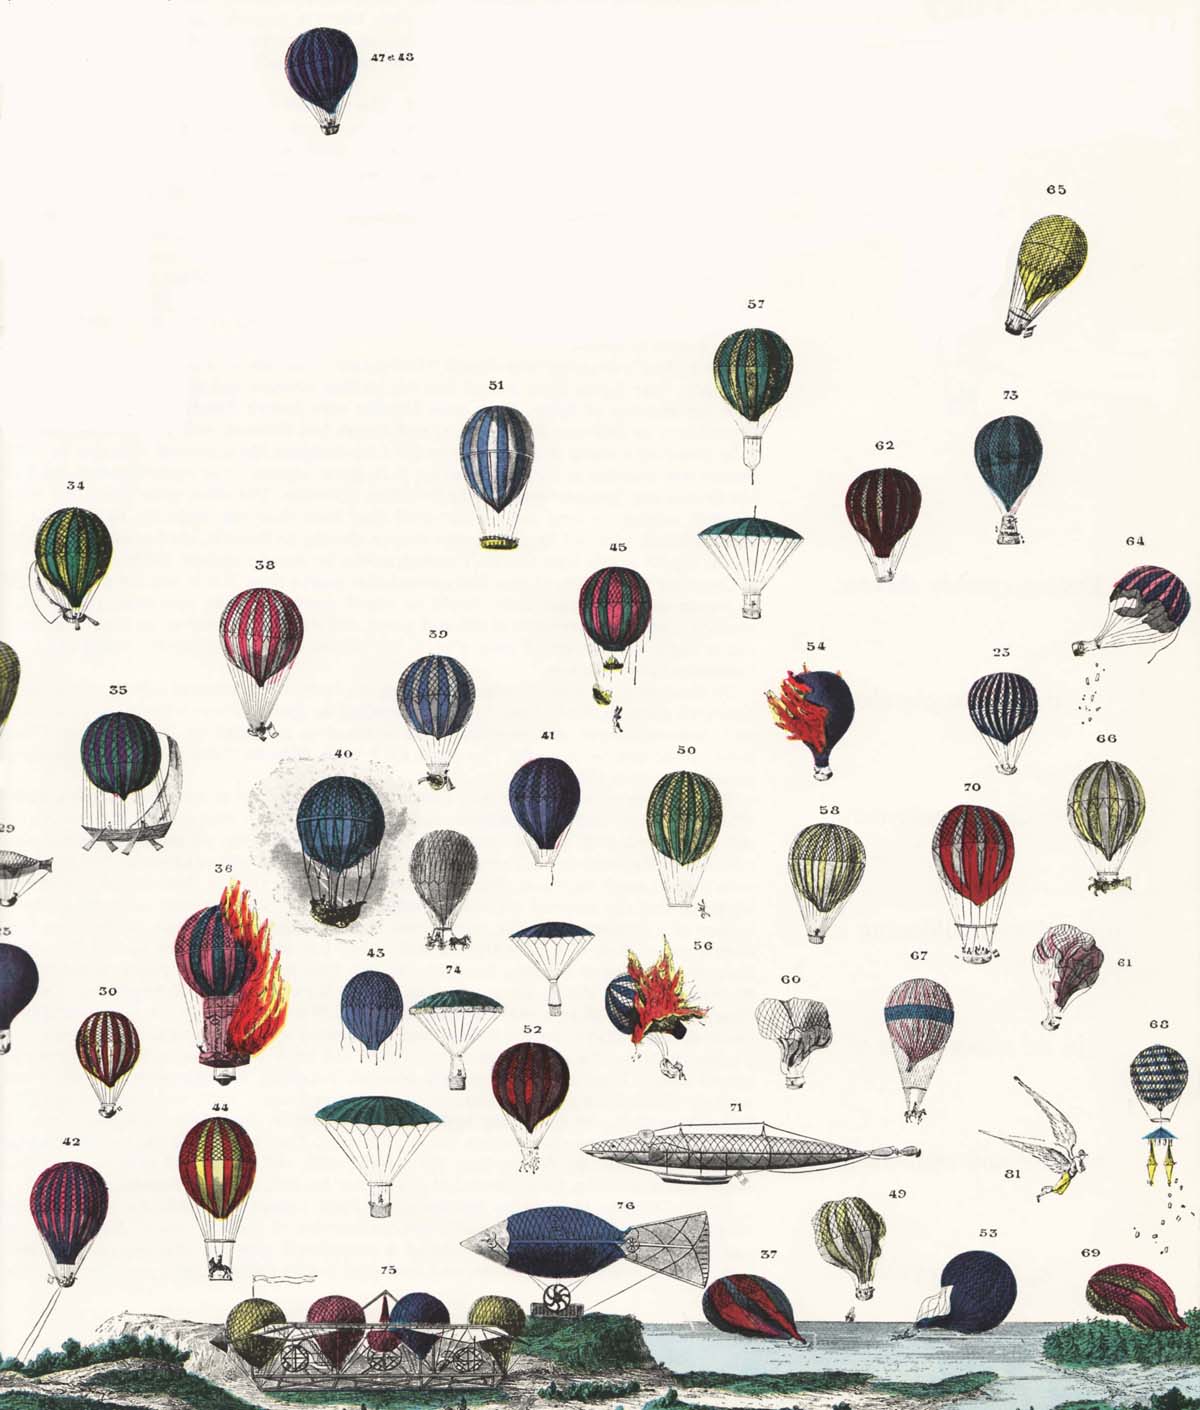 Vintage Hot Air Balloons Wallpaper Background Graphic 1200x1410